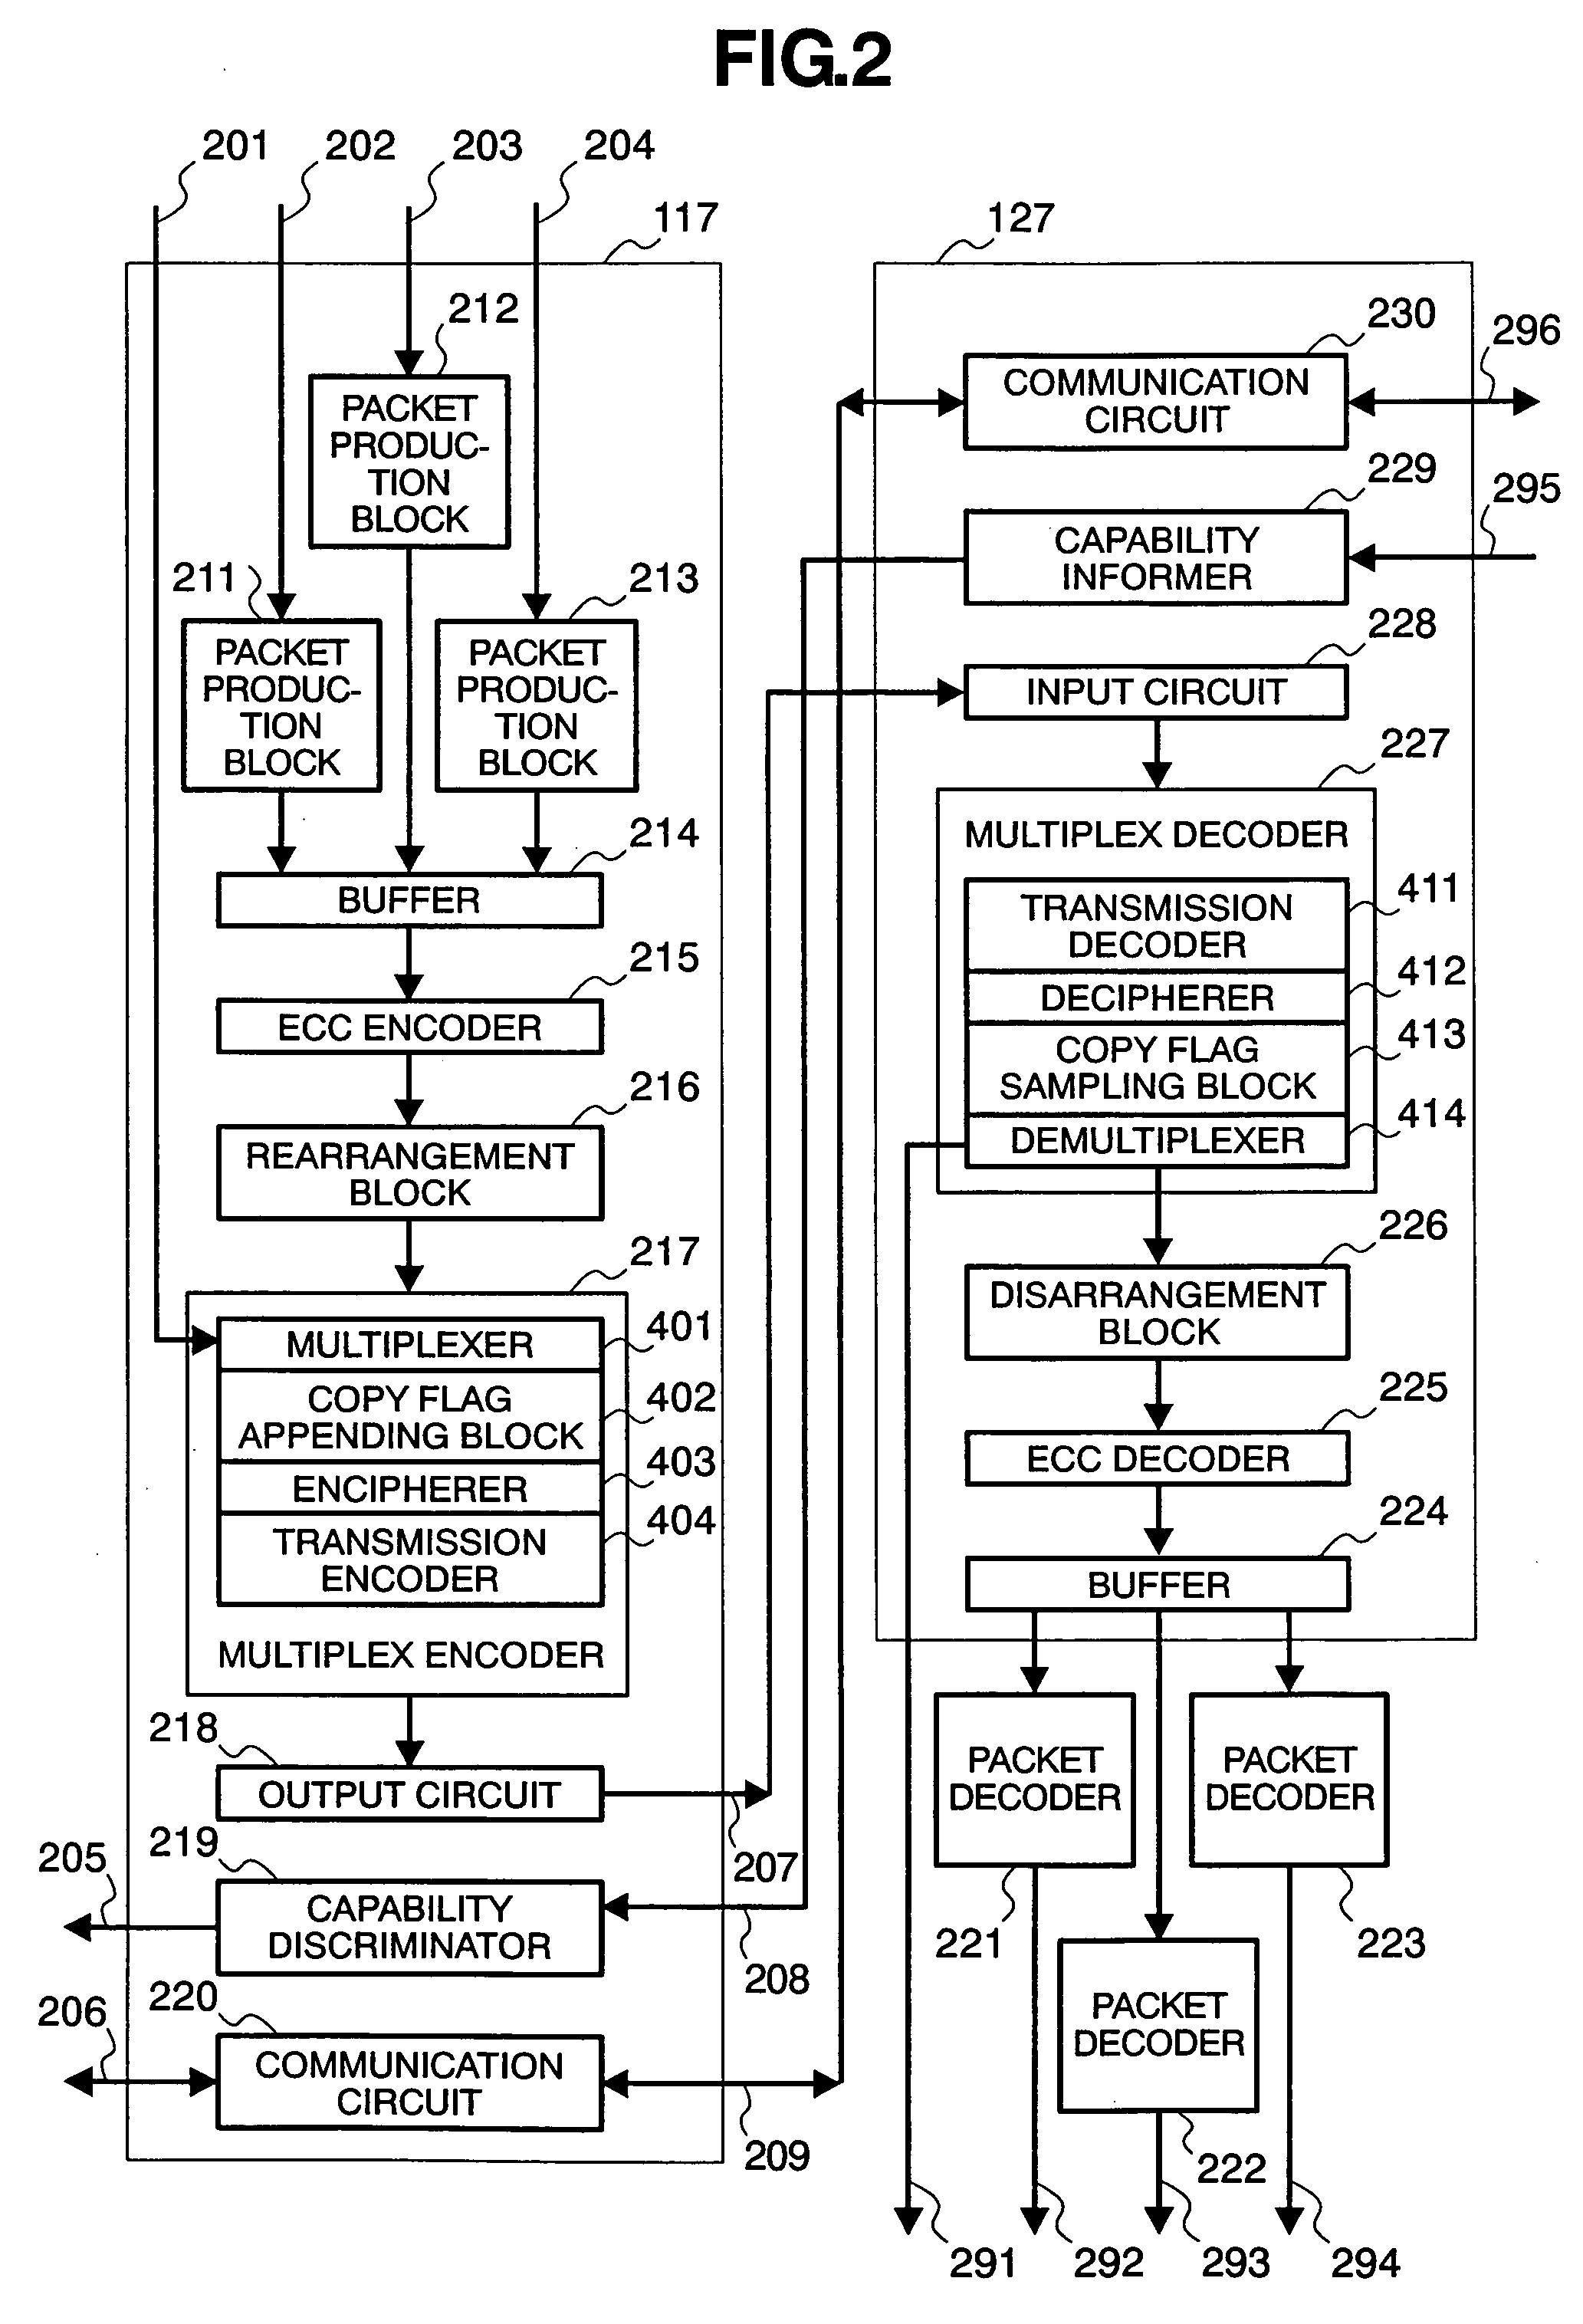 Video signal transmission method and video processing system